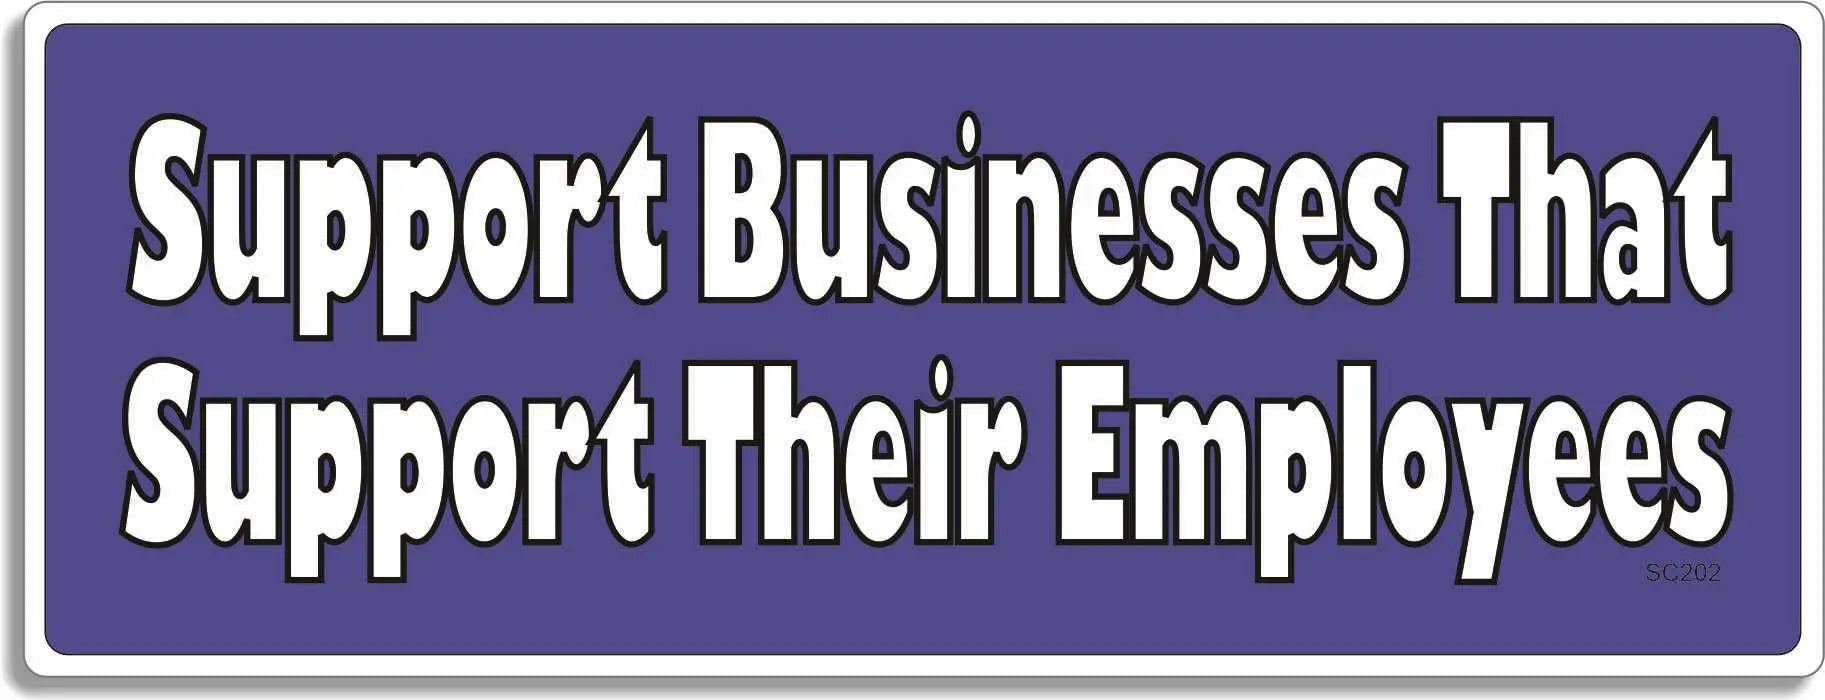 Support Businesses That Support Their Employees - Pro-Labor Bumper Sticker, Car Magnet Humper Bumper